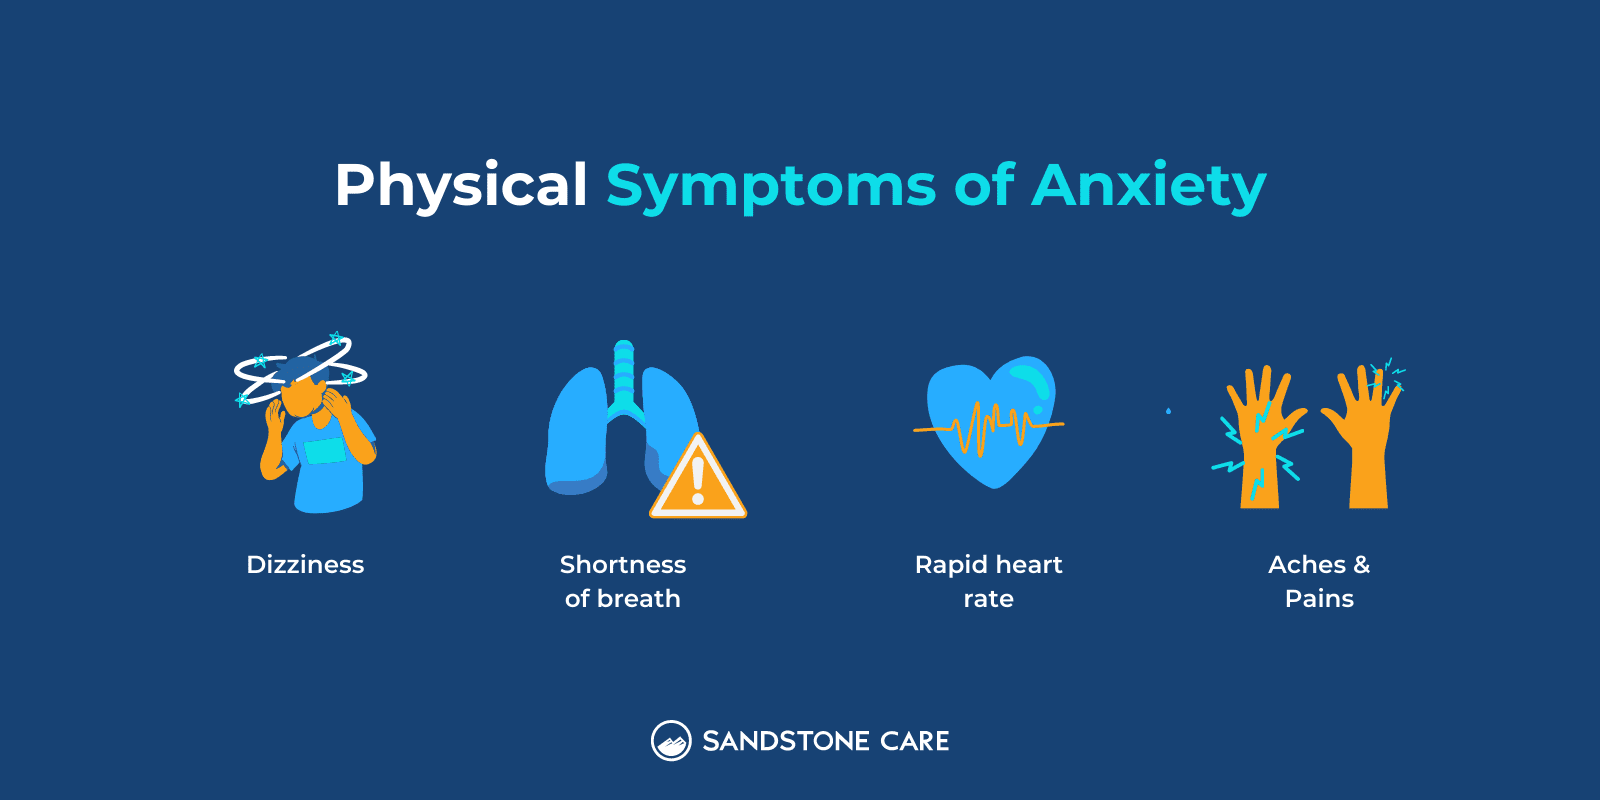 Physical Symptoms Of Anxiety illustrated with relevant illustrations of the symptoms